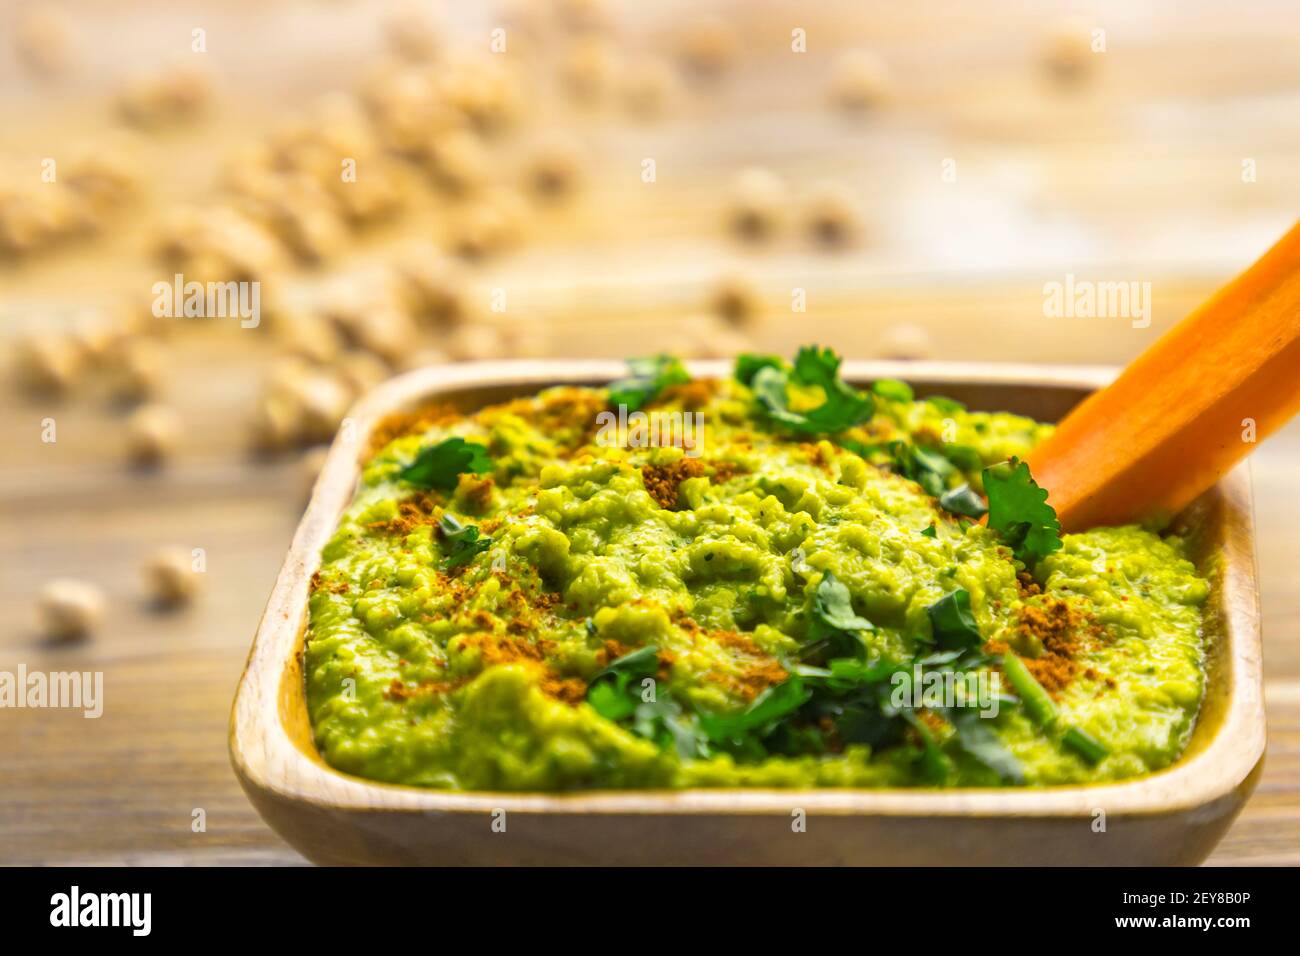 Homemade chickpea hummus with herbs in square bamboo wooden bowl, carrot stick Stock Photo